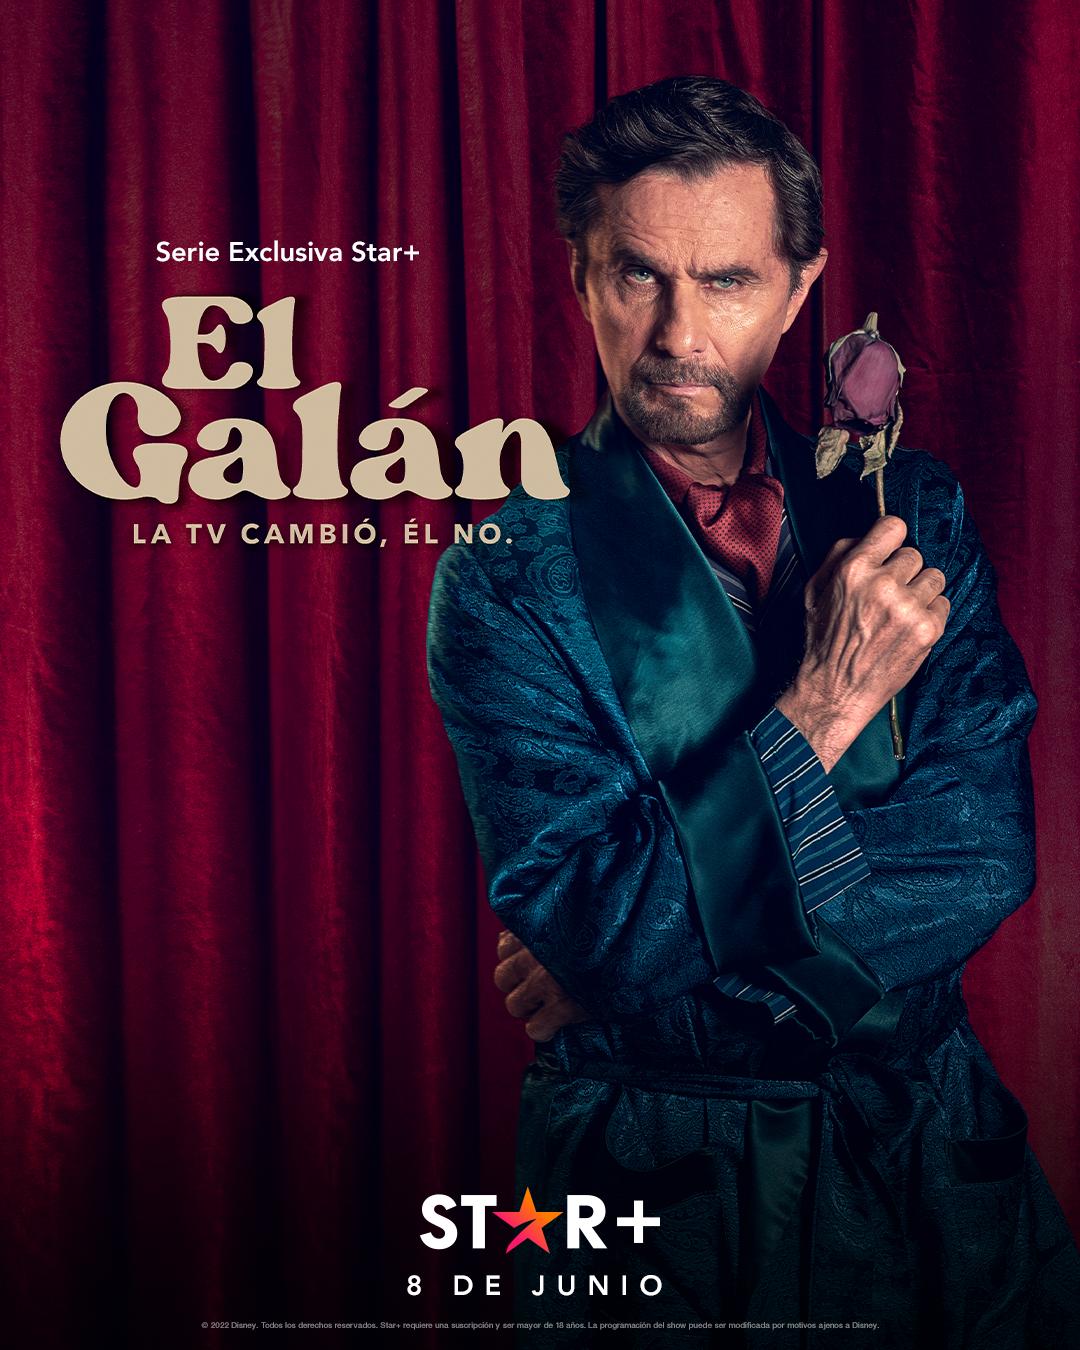 TV ratings for The Gallant. TV Changed, He Didn't (El Galán. La Tv Cambió, Él No) in Germany. Star+ TV series